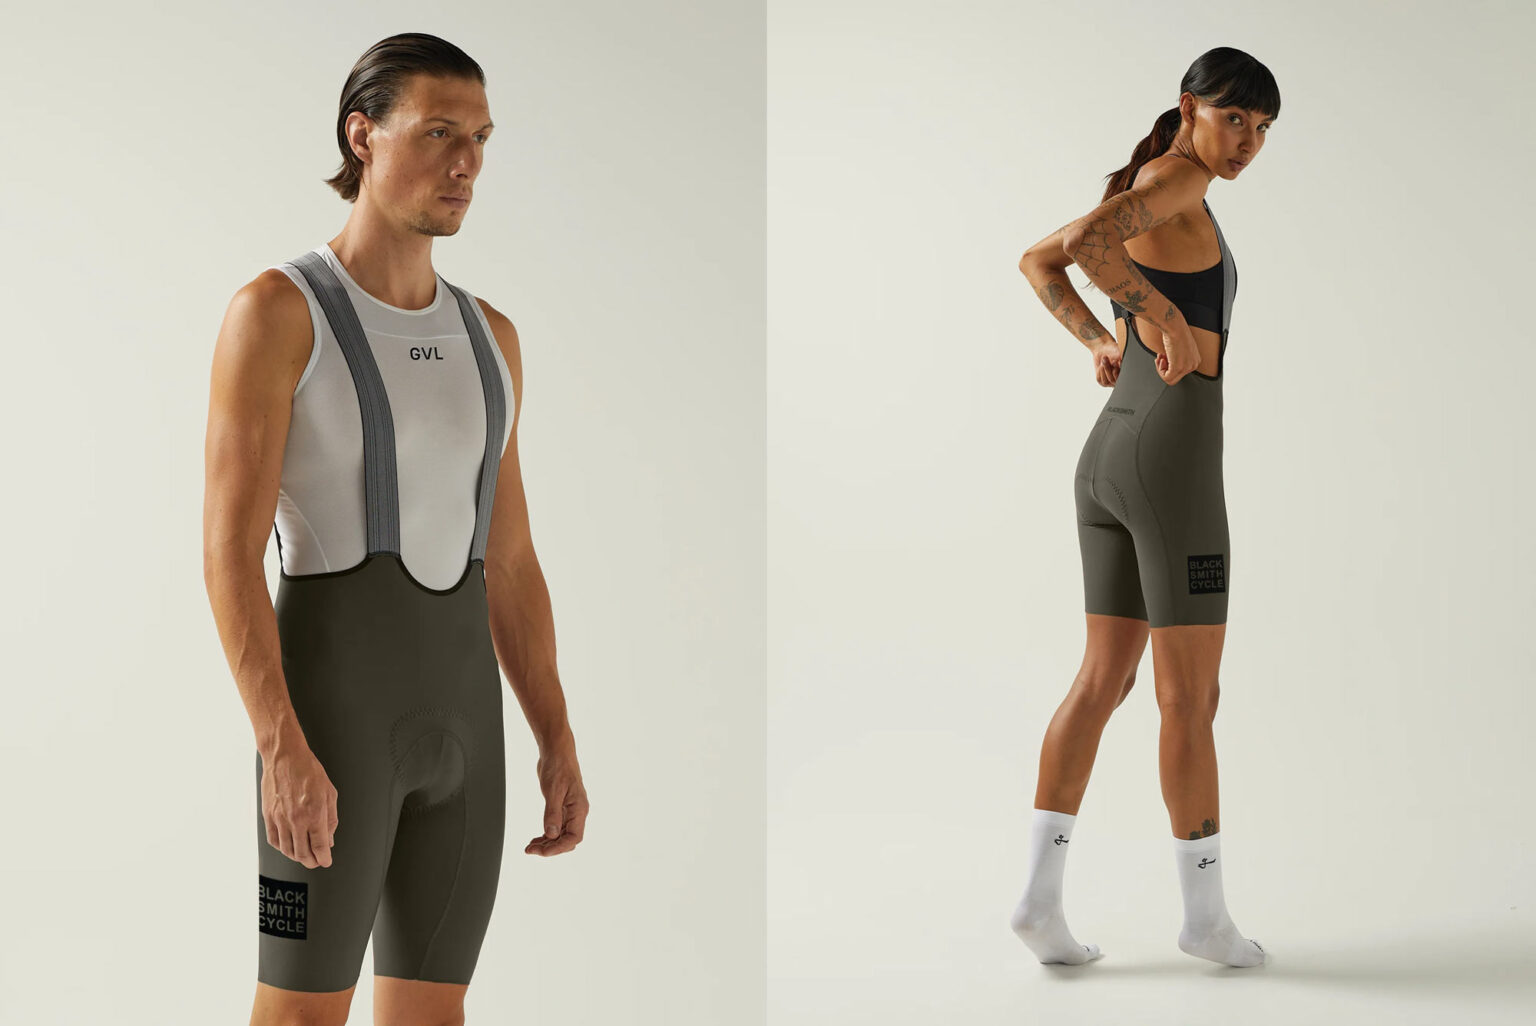 B Harms Special Projects Cycling bibshorts on a man and a woman